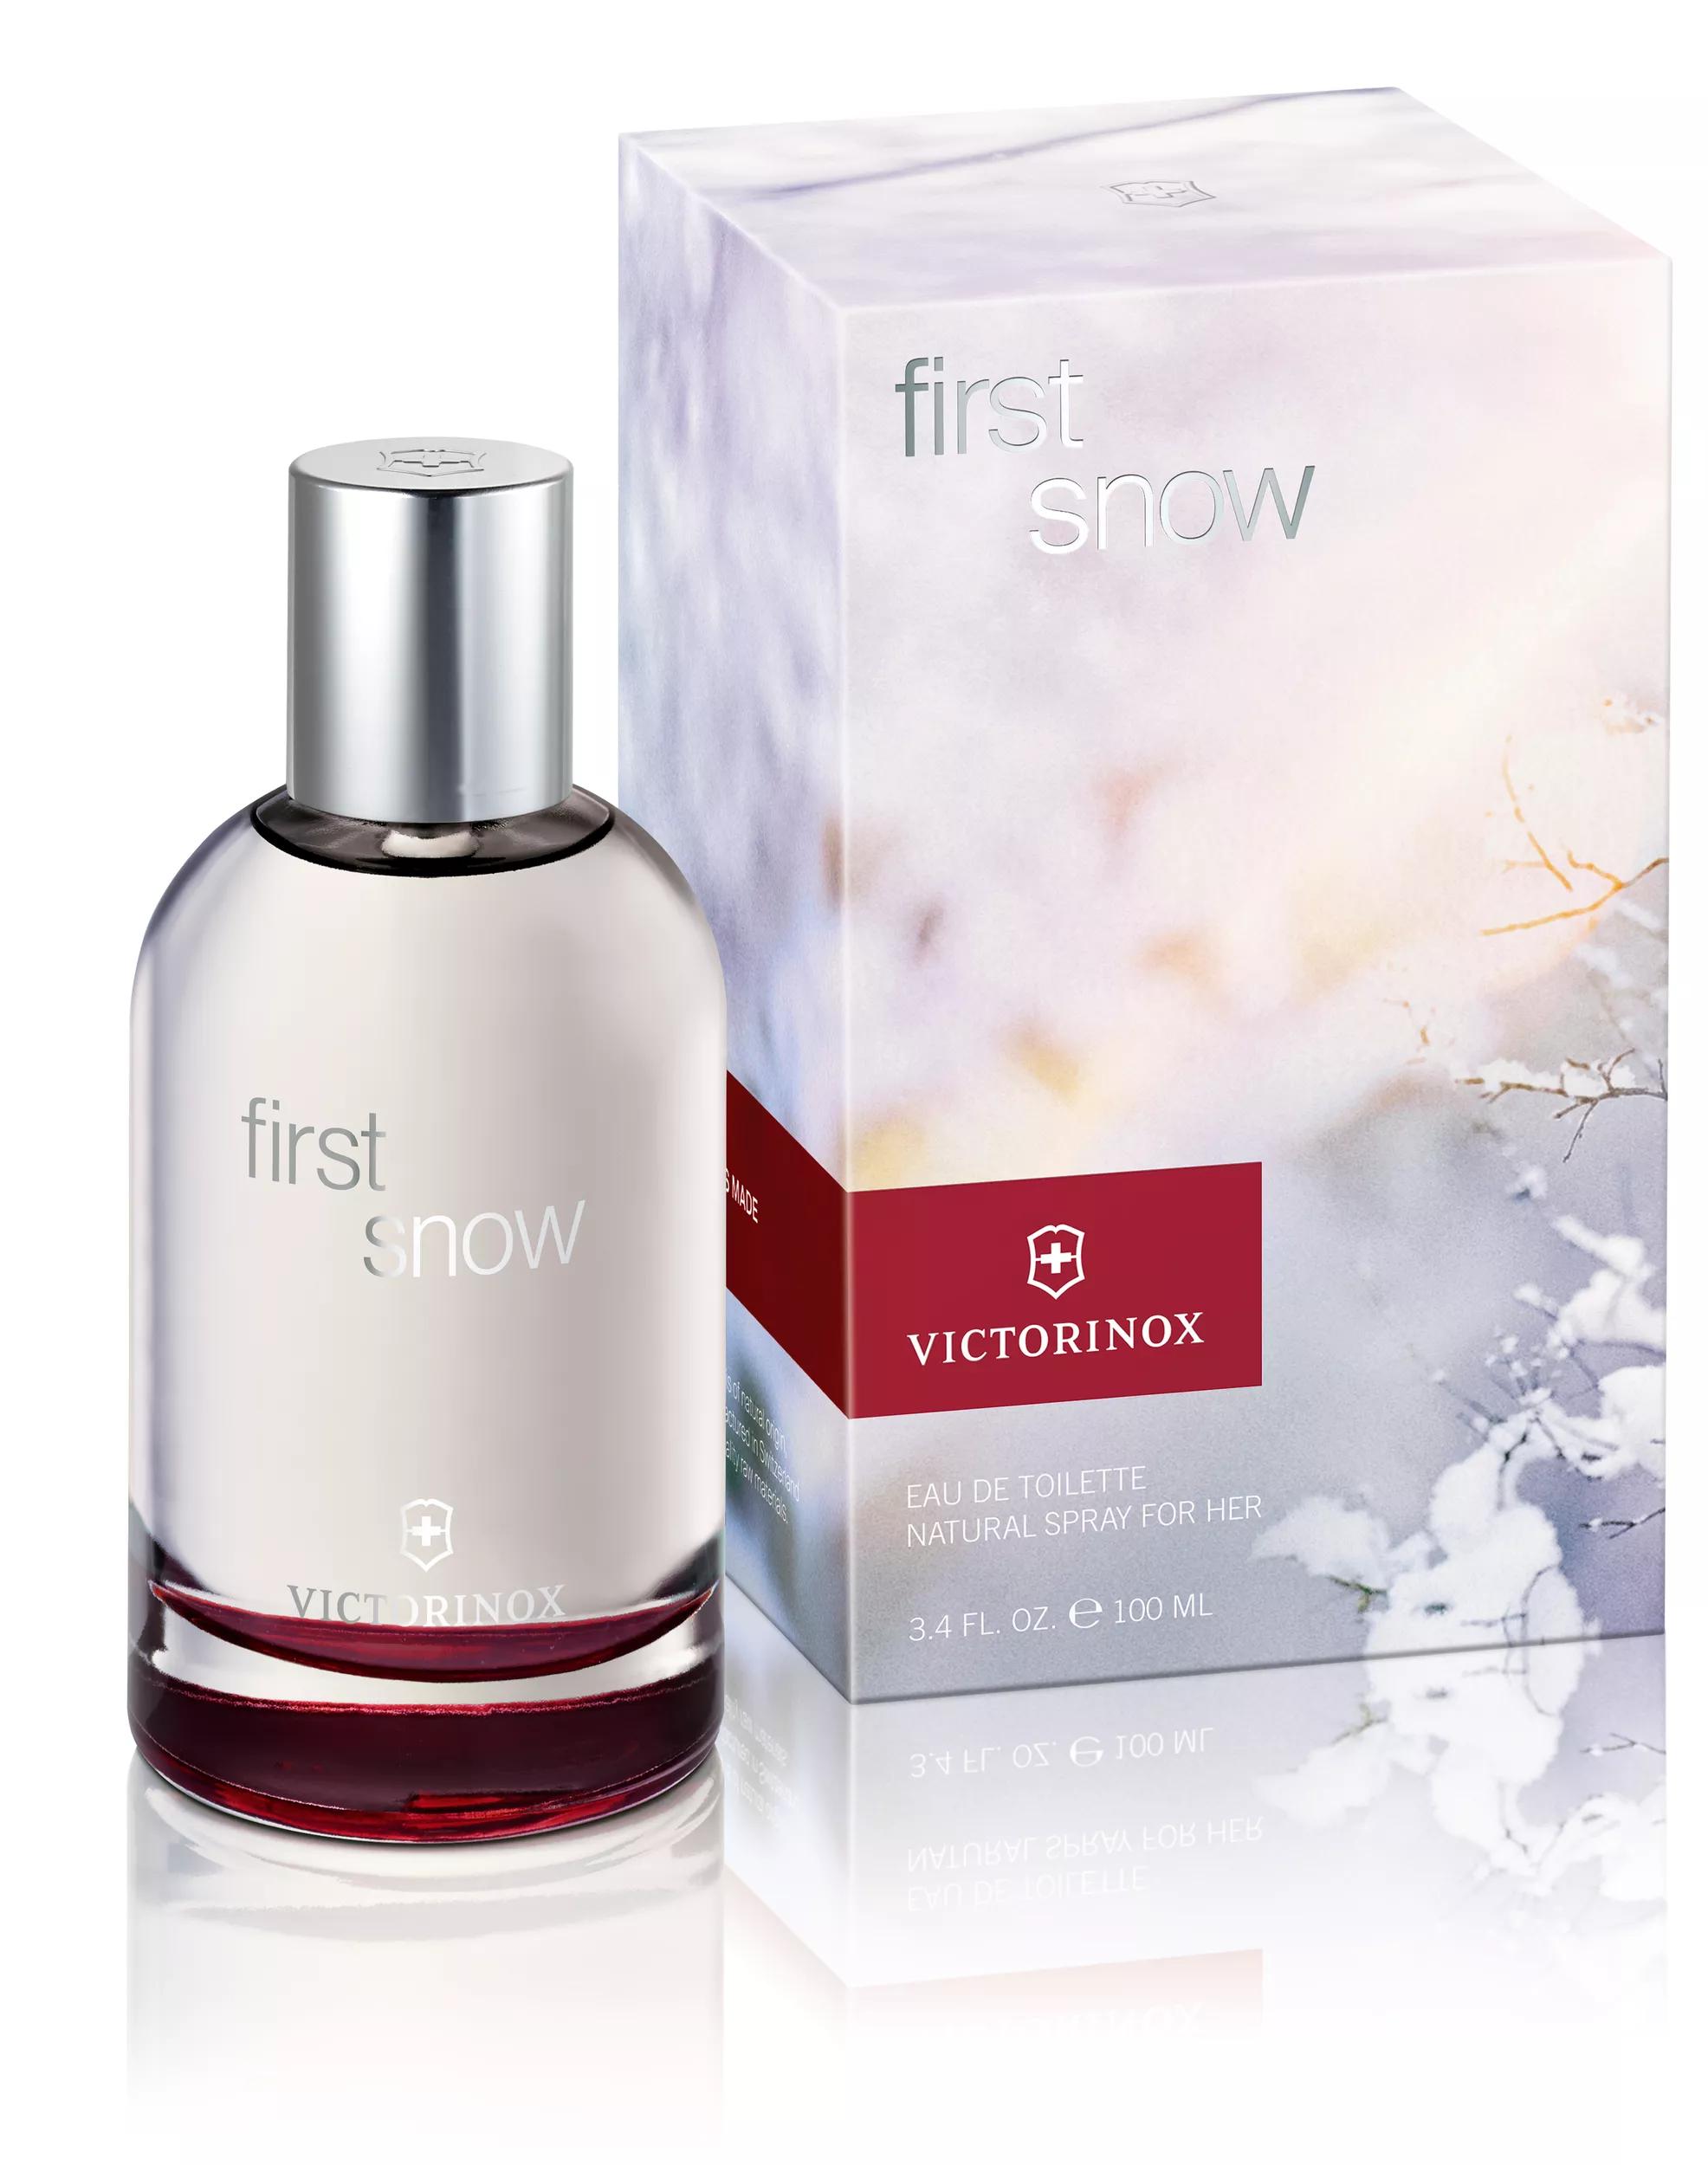 First Snow: Embrace the moment with the cocooning new Victorinox fragrance